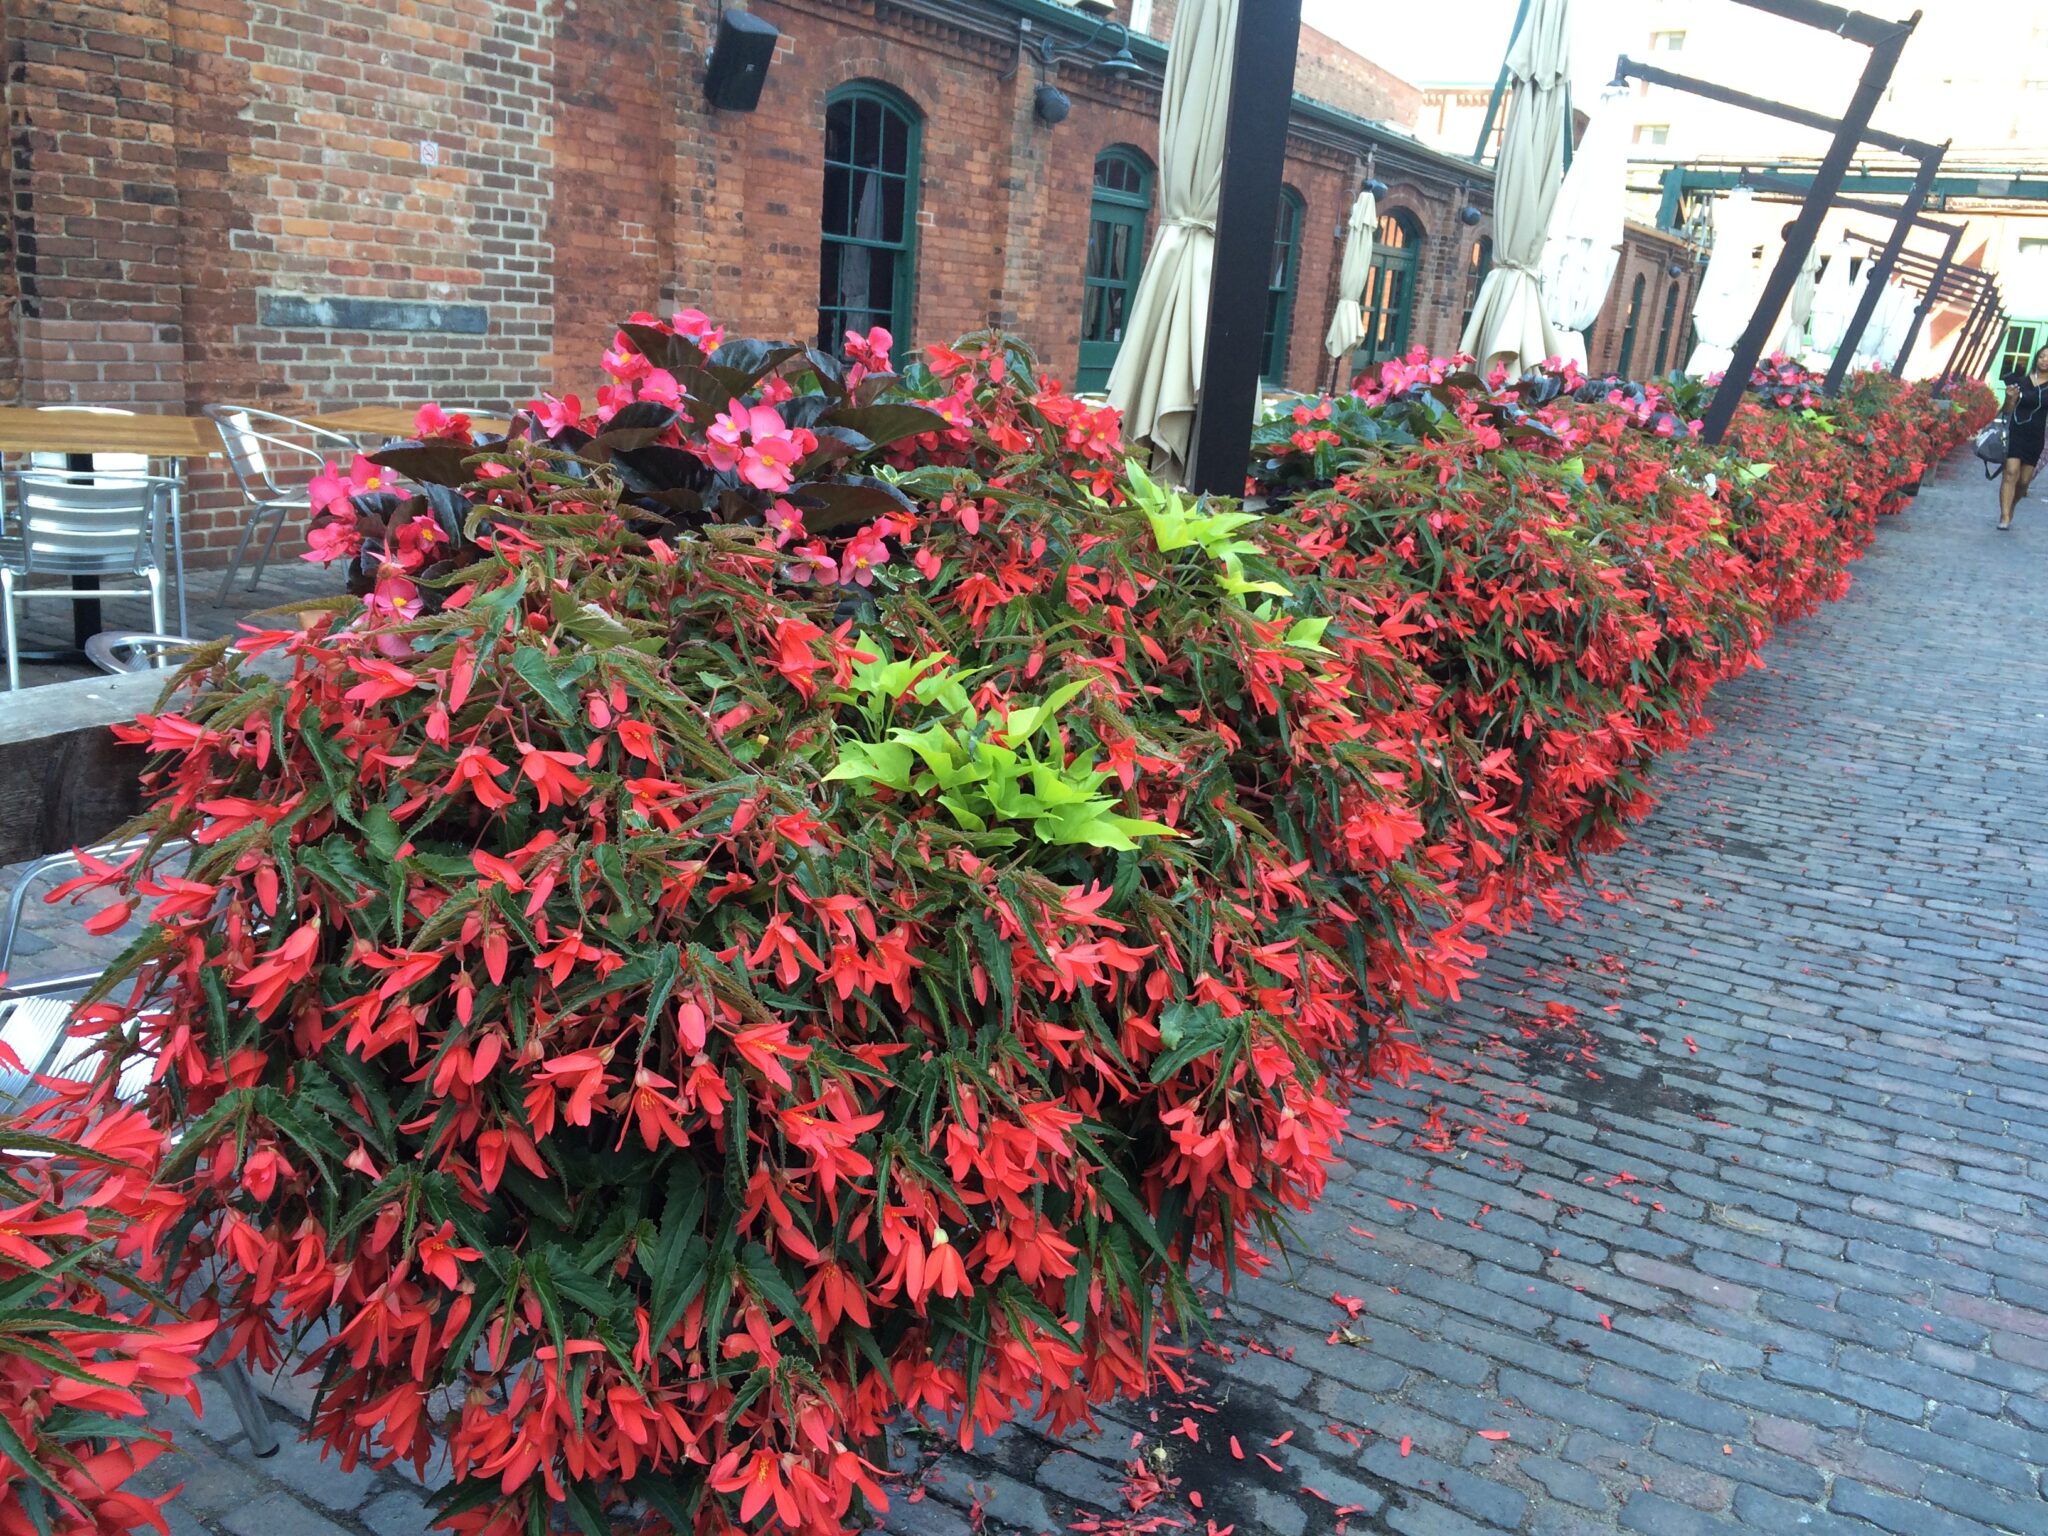 Red flowering begonias shaped like a hedge in planters in a row.